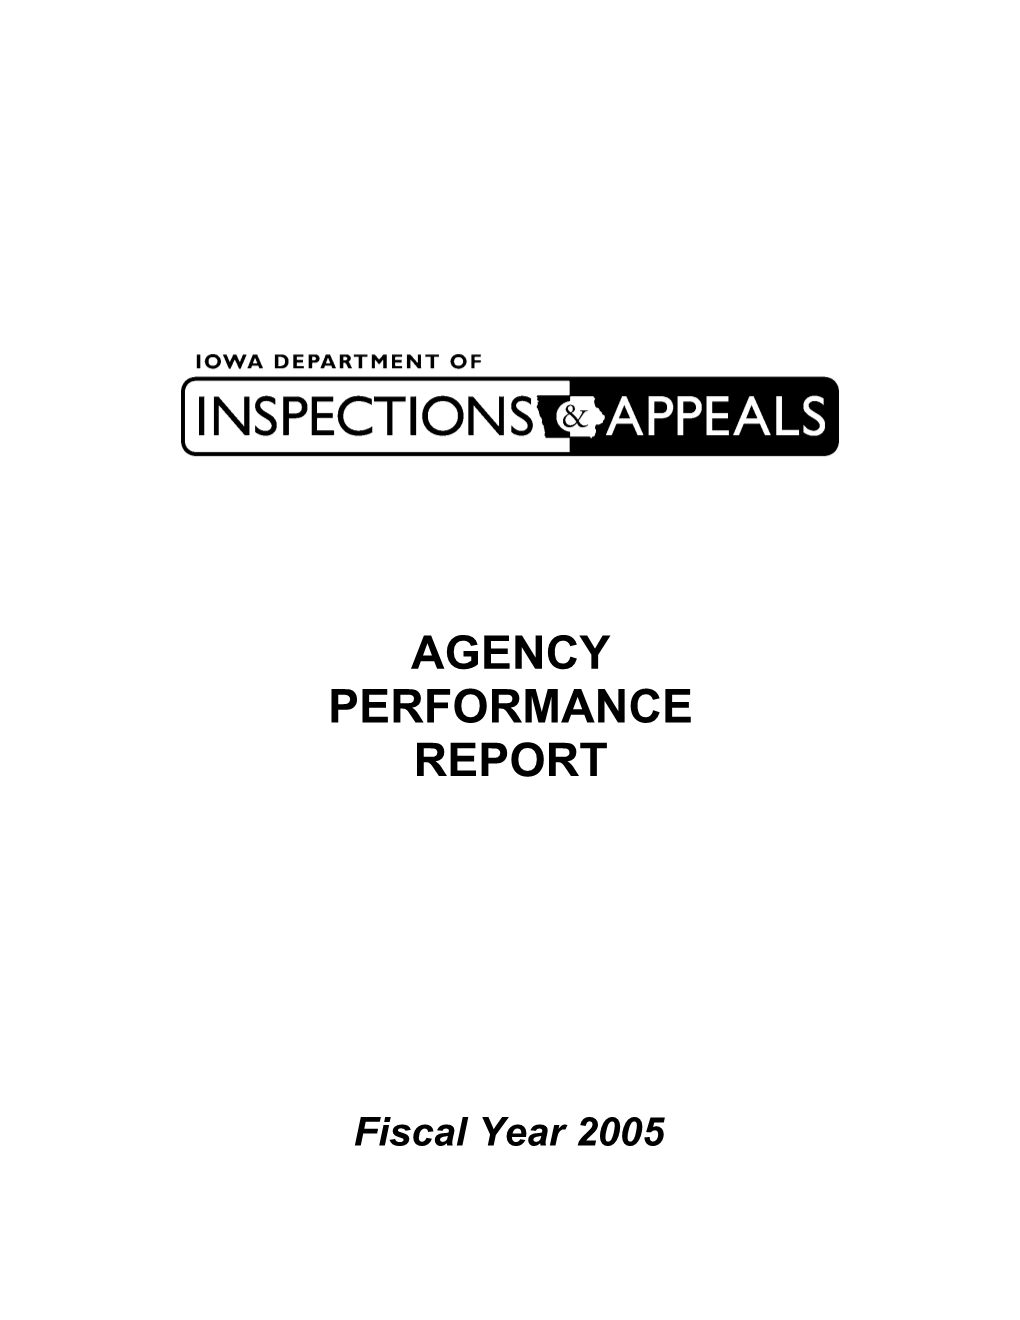 Agency Performance Report